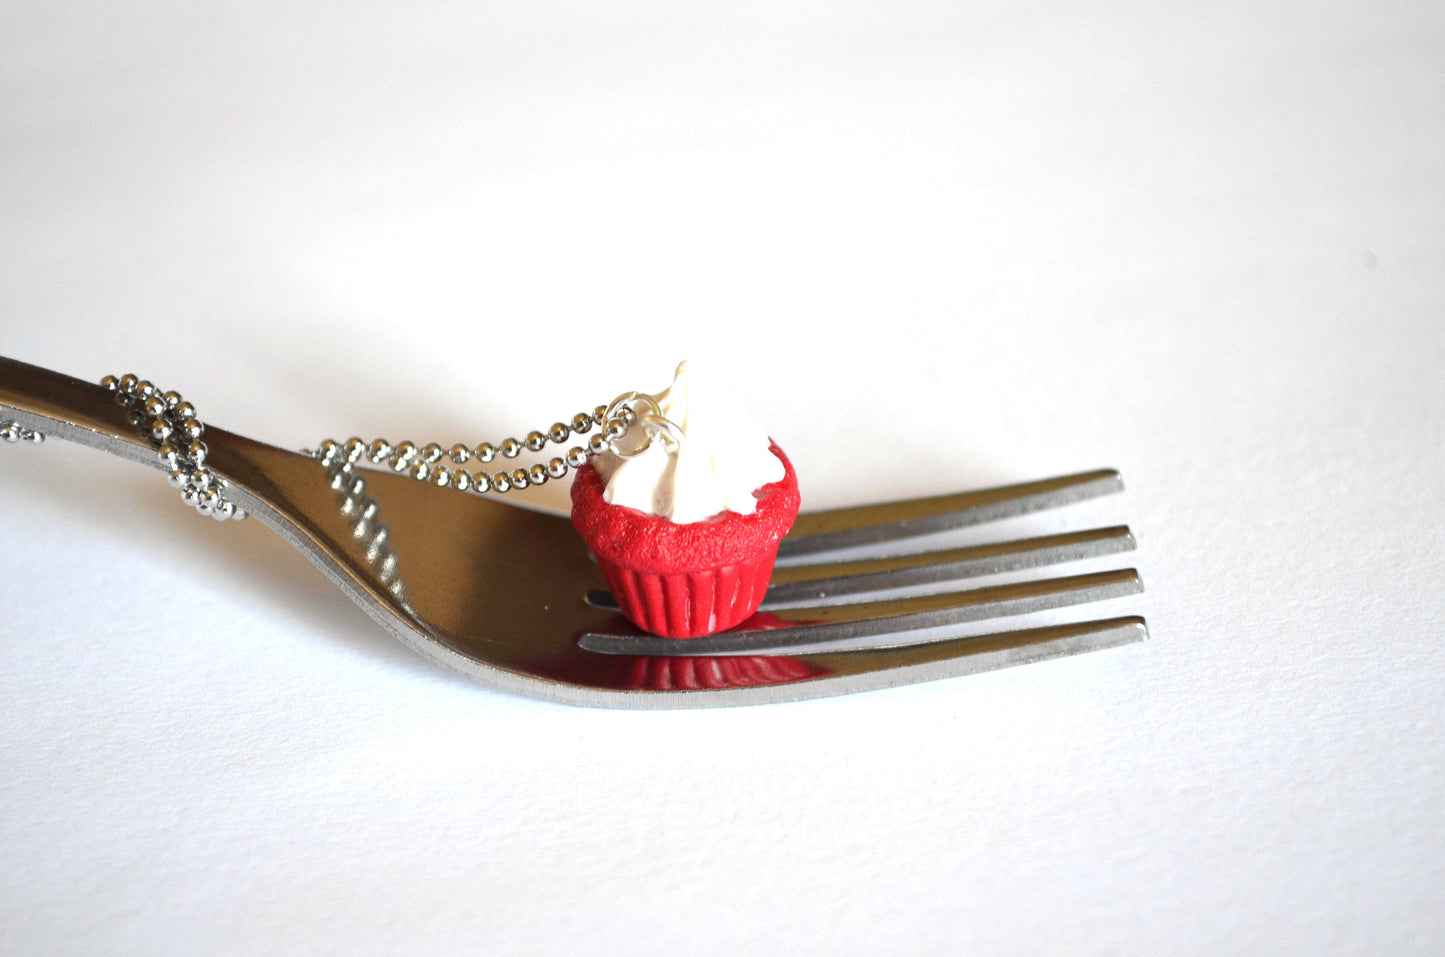 Red Velvet Cupcake With Vanilla Frosting necklace